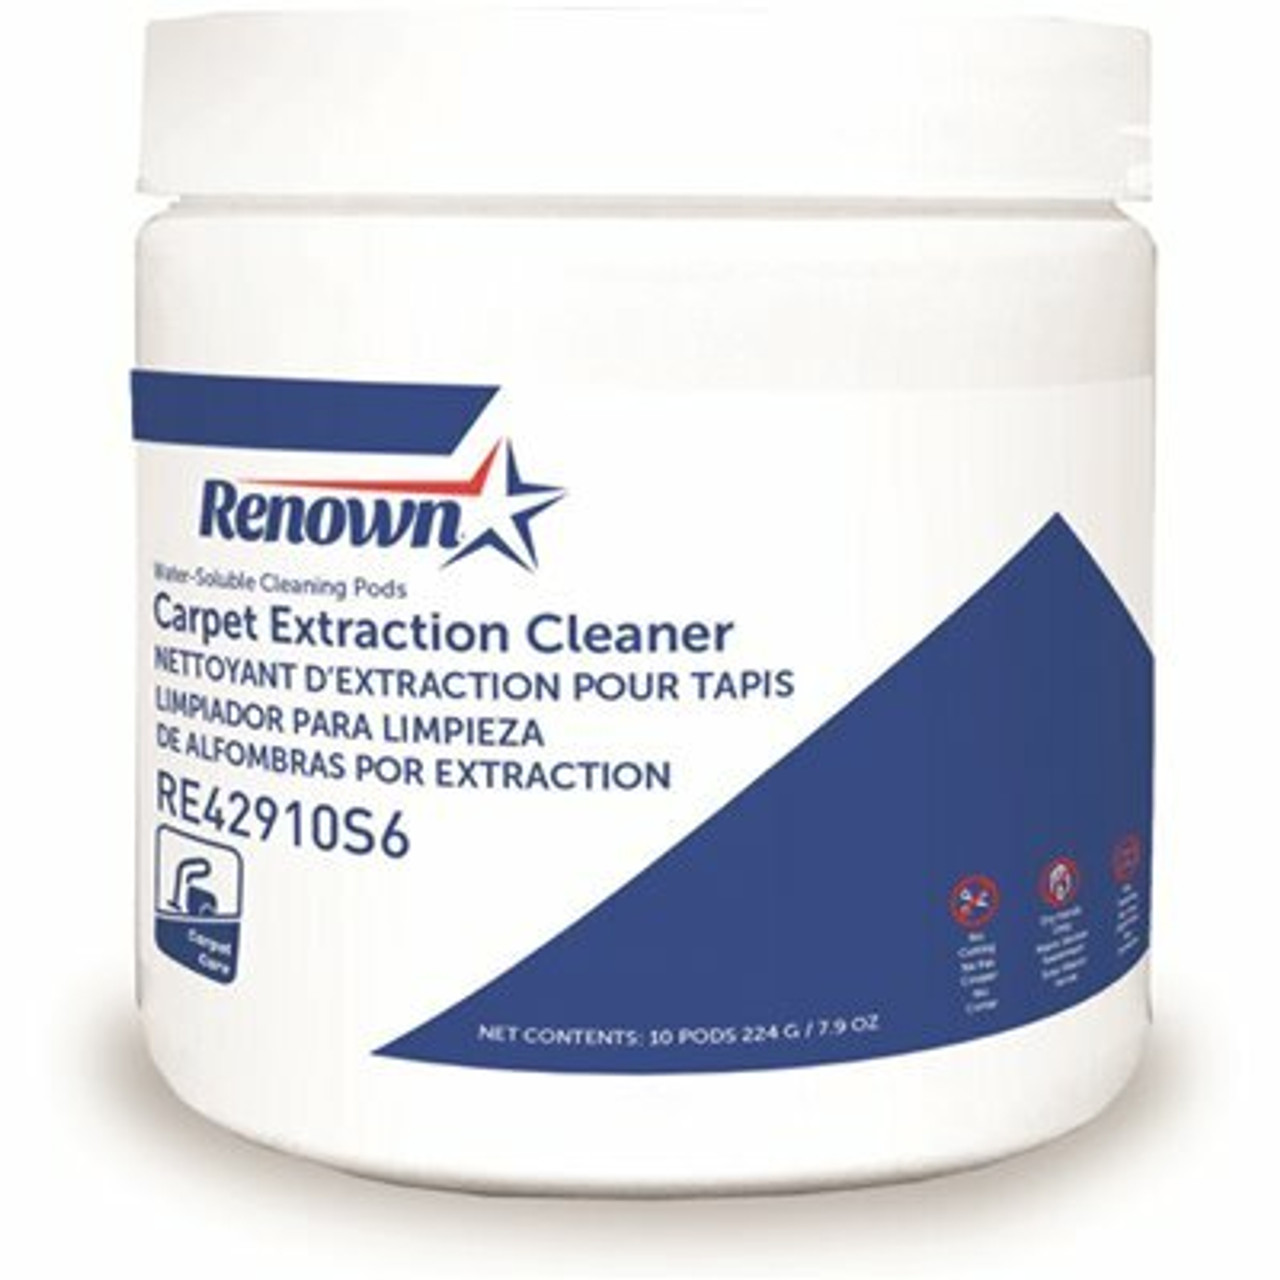 Renown Carpet Extraction Cleaner Pod - 311317027